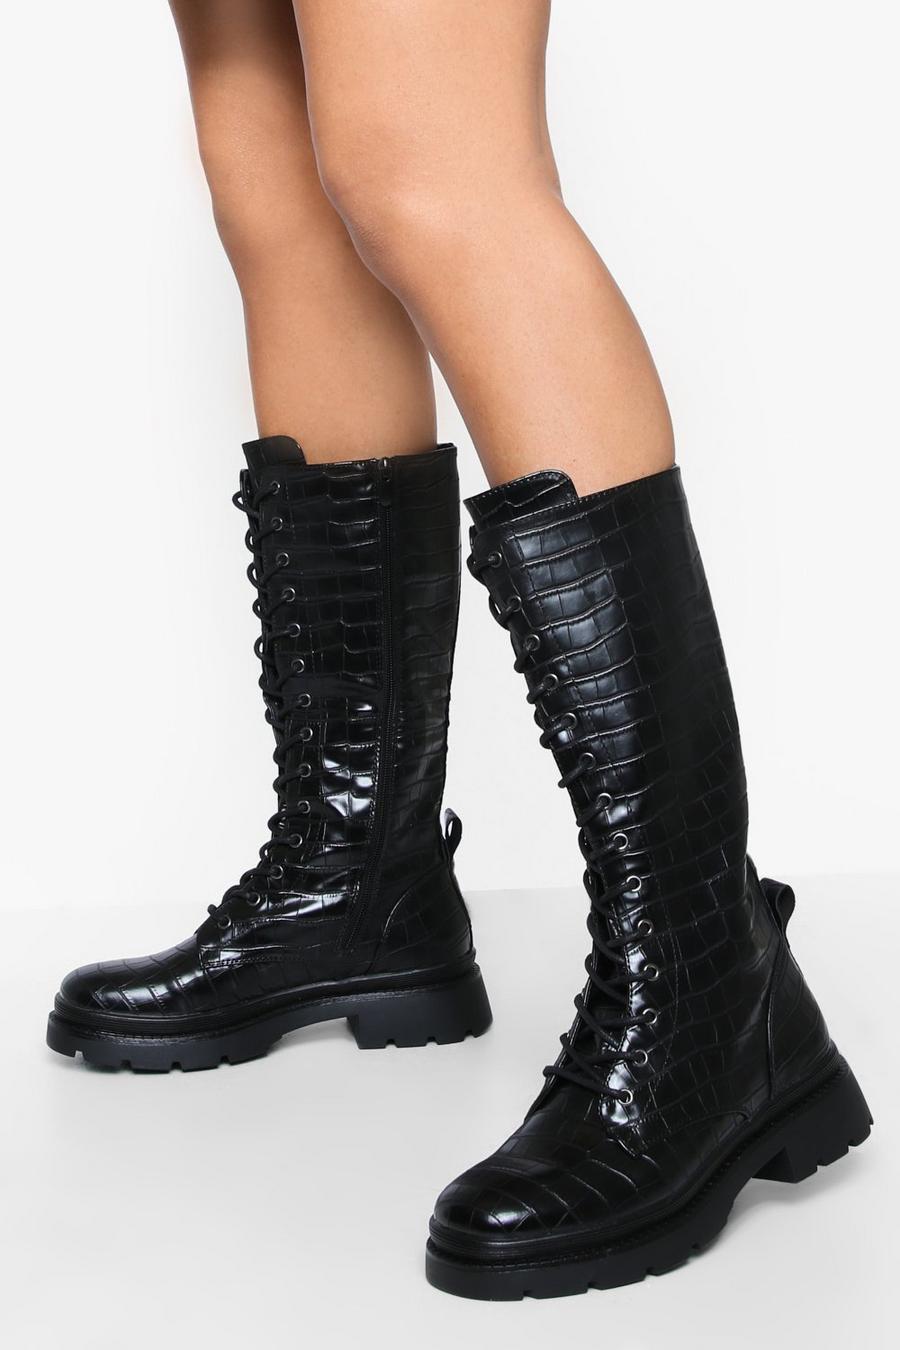 Black nero Lace Up Detail Calf High Boots